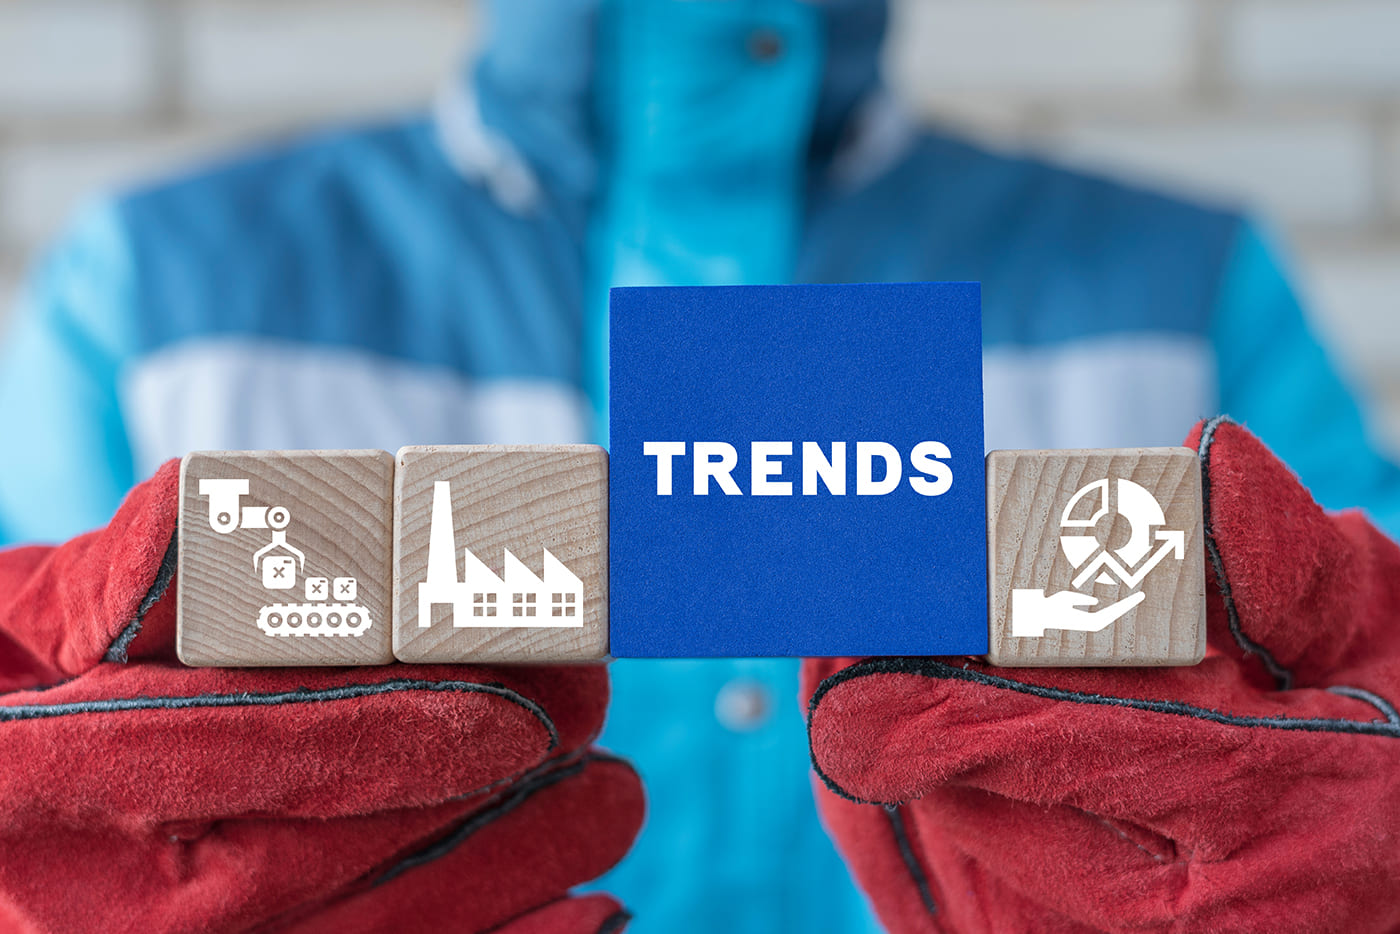 The Top 5 Manufacturing Trends In 2023 | Bernard Marr